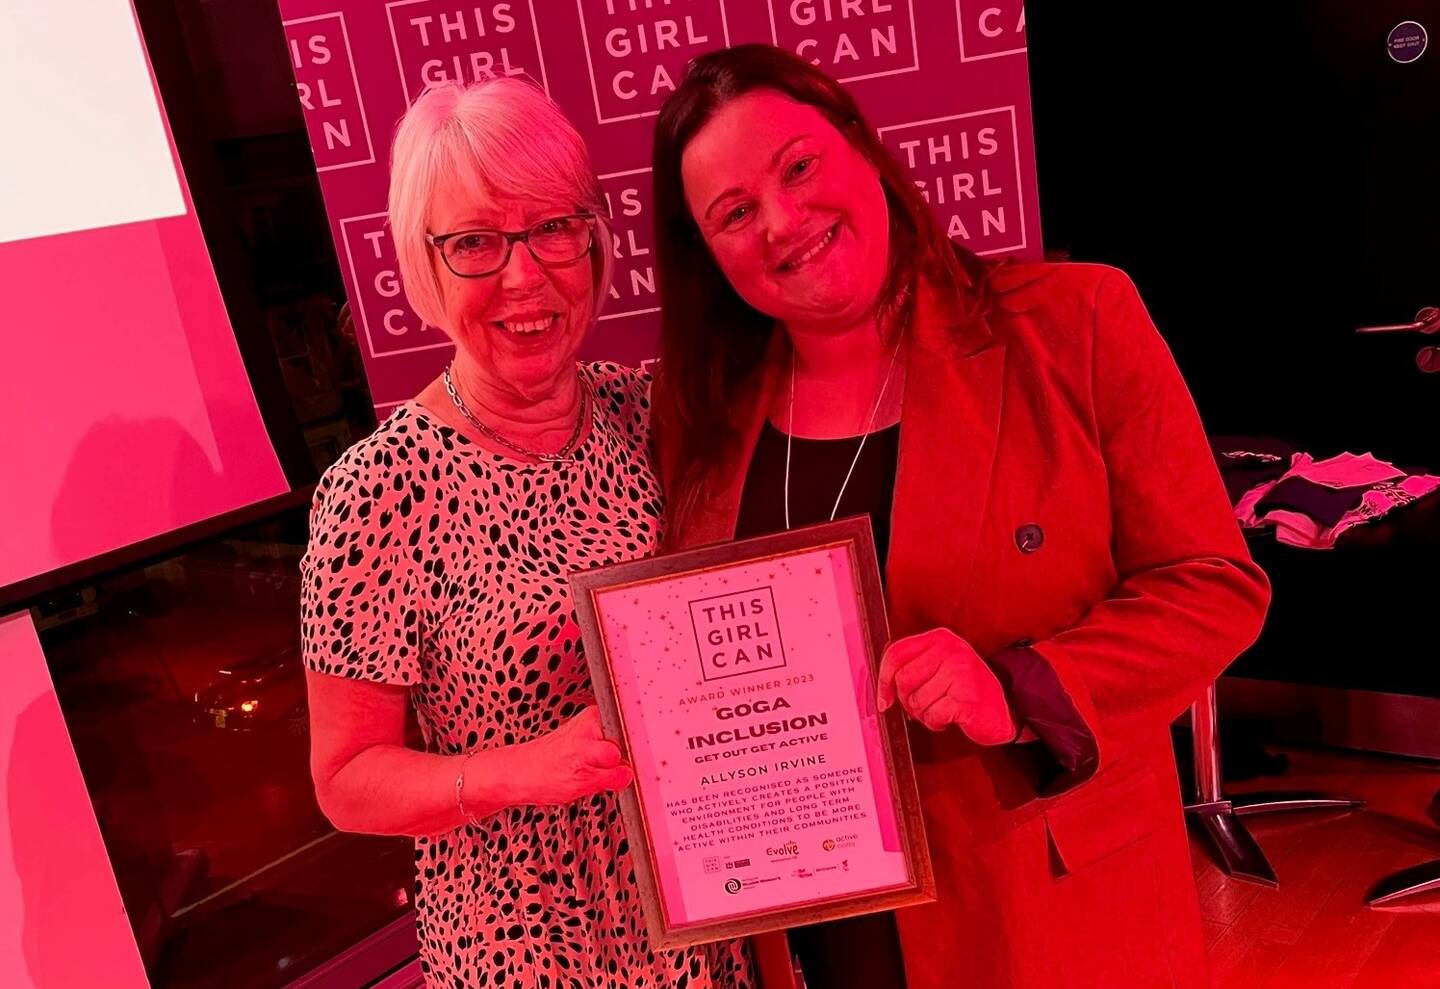 Allyson Irvine with Helen Derby celebrating Allyson winning an award for This Girl Can in Nottingham. 